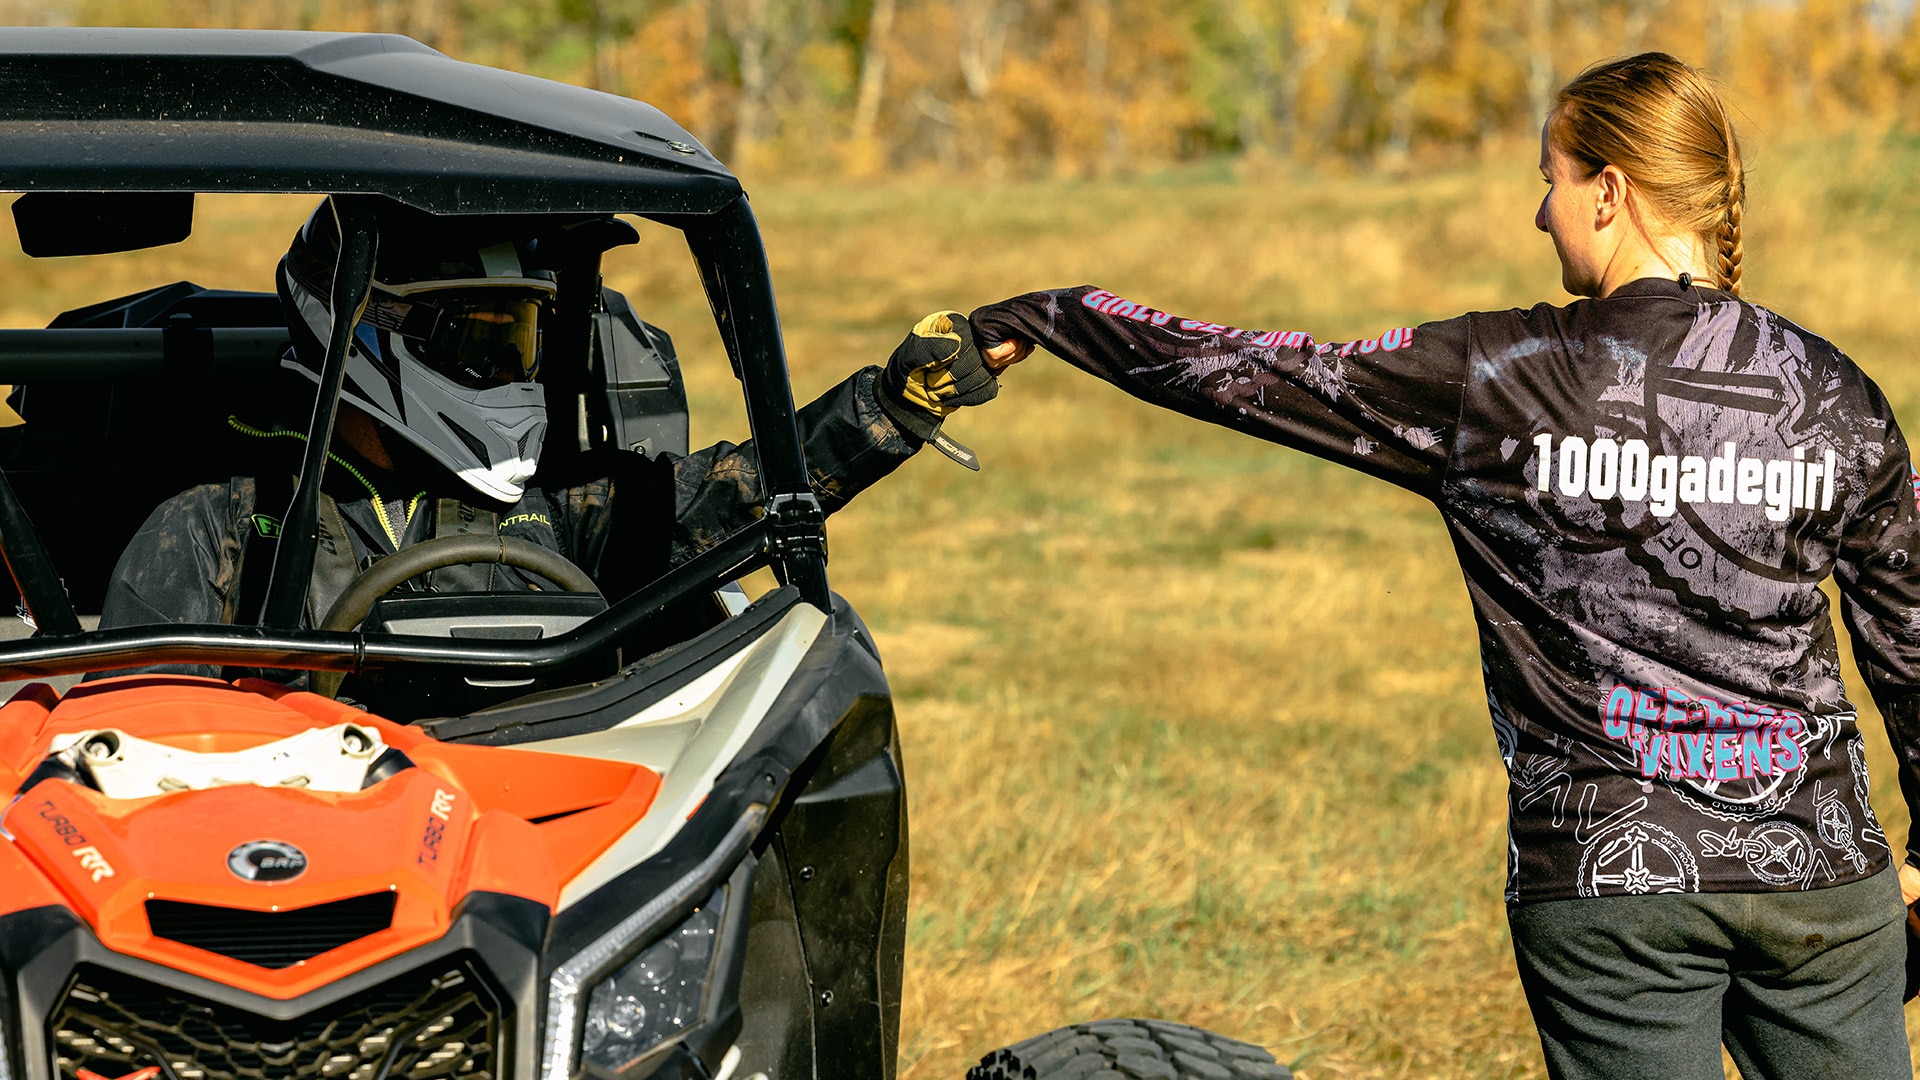 Two Can-Am off-road rider fist bumping